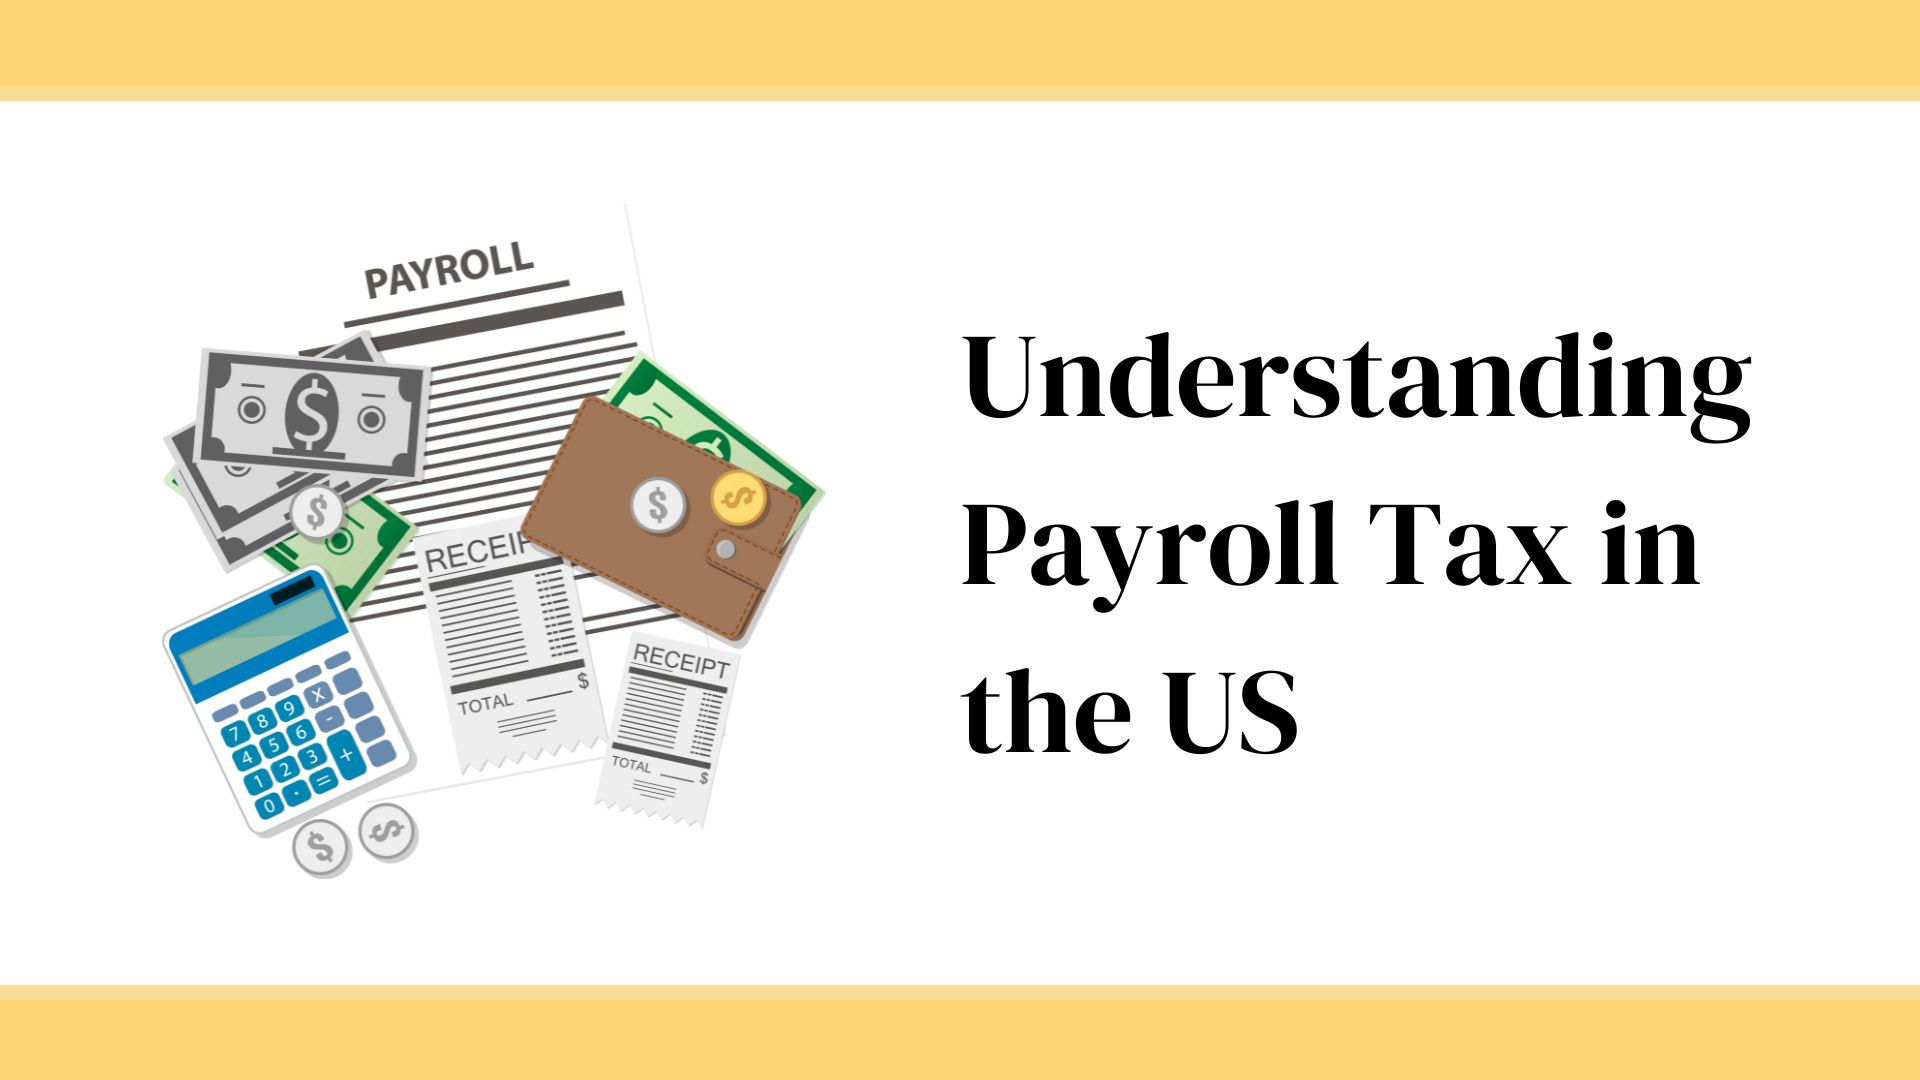 Payroll Tax in the US